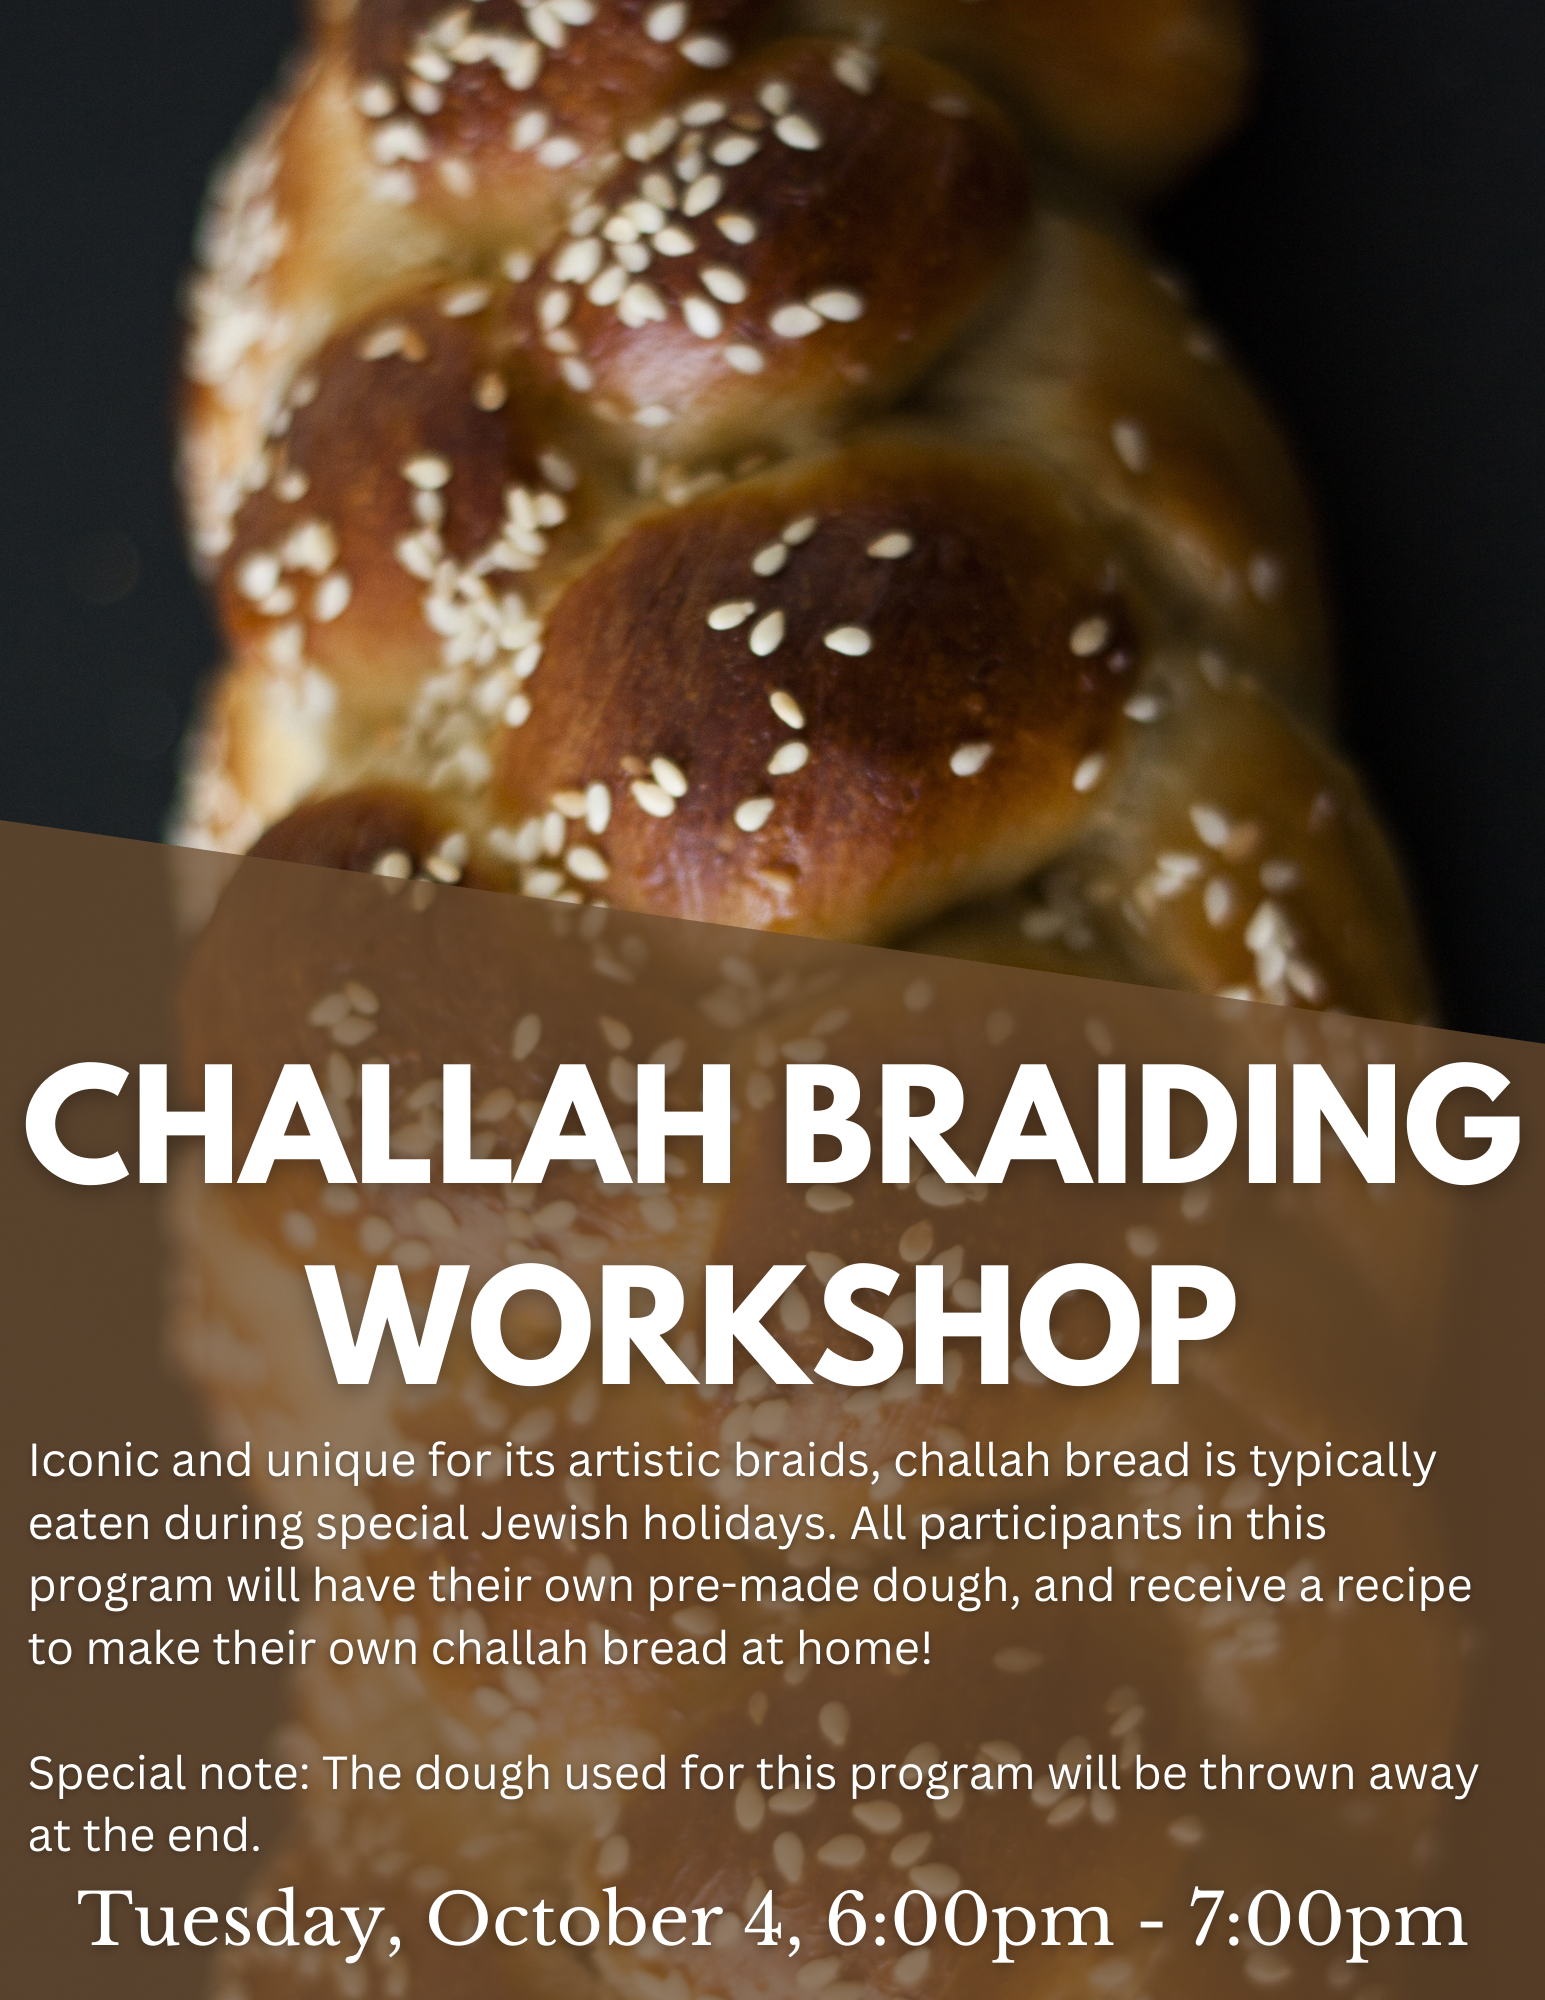 An image of a challah bread with text above with information about the program.